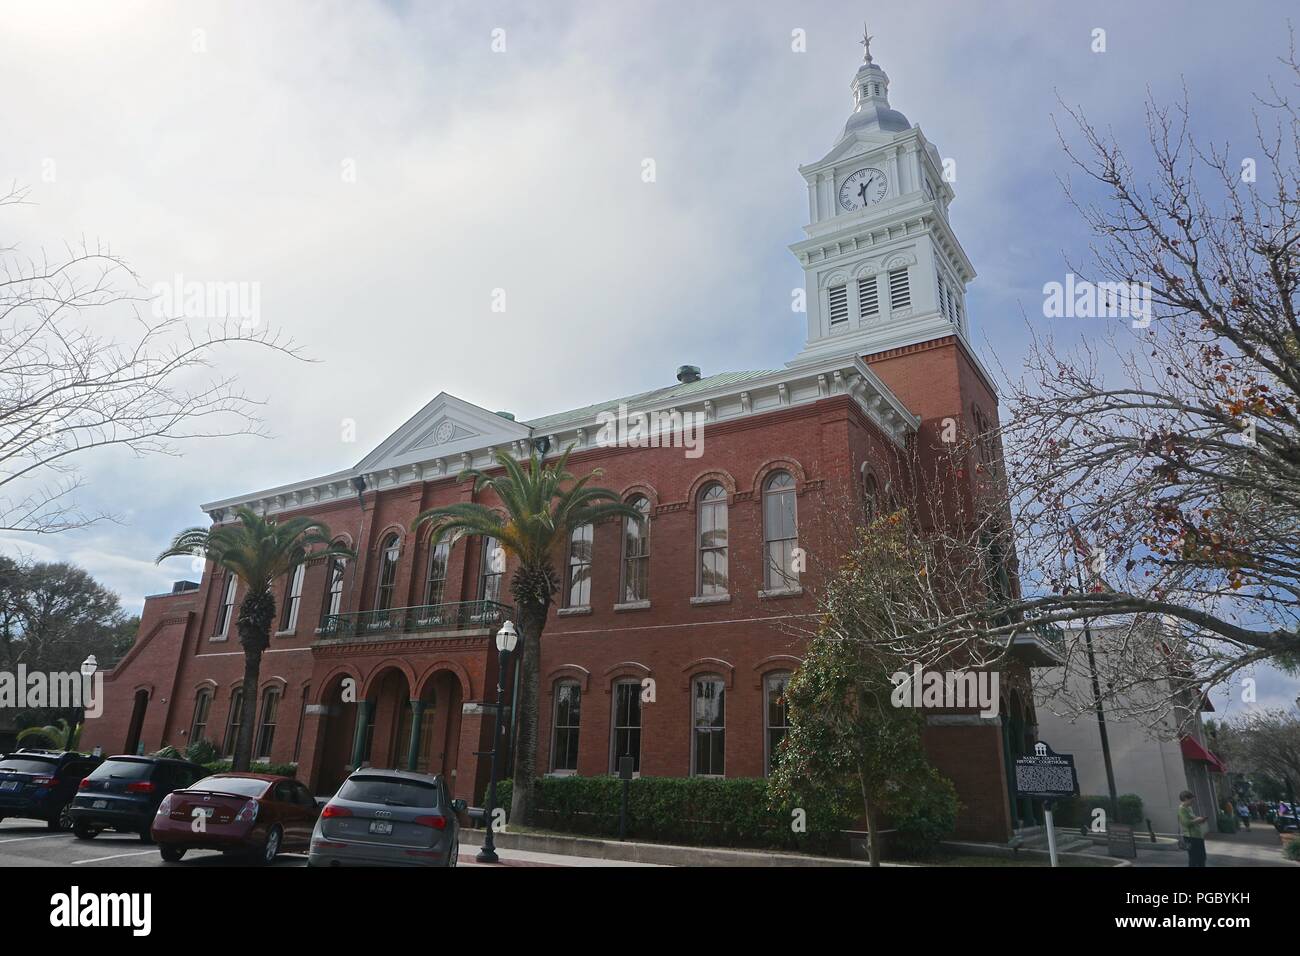 Fernandina Beach, FL, USA: The Classical Revival style Old Nassau County Courthouse (1891) features Corinthian columns and a bell tower and steeple. Stock Photo